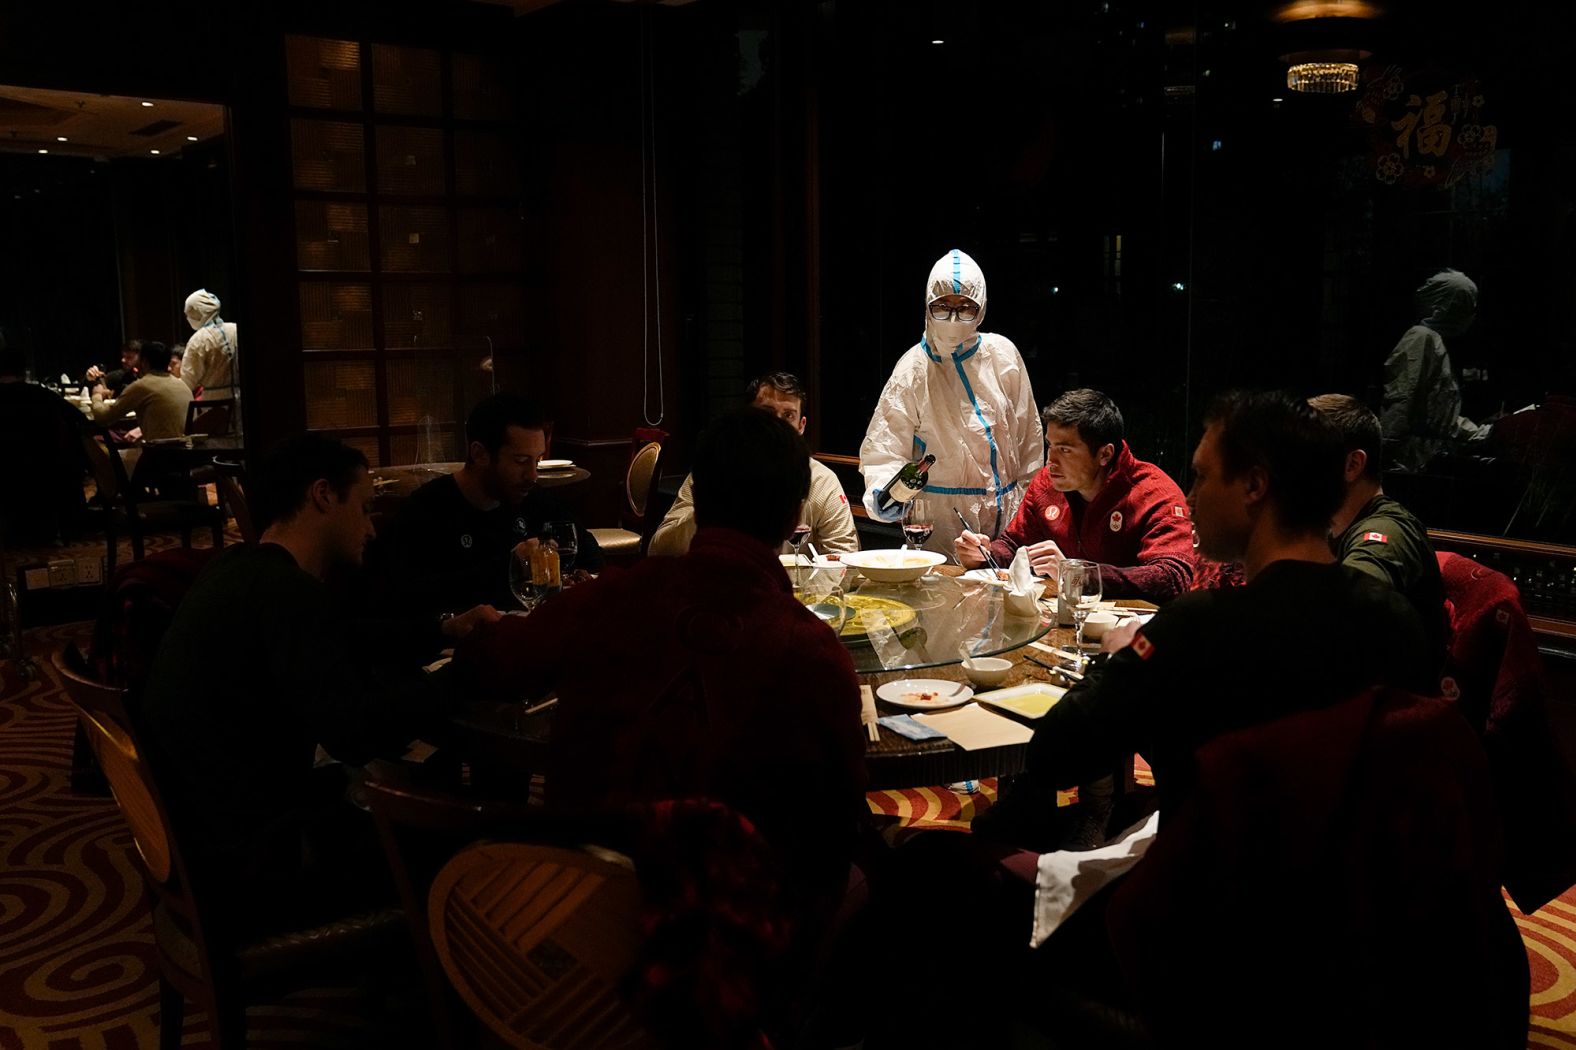 A waitress wearing protective gear serves a table at a hotel restaurant inside the <a href="index.php?page=&url=https%3A%2F%2Fwww.cnn.com%2F2022%2F01%2F21%2Fchina%2Fbeijing-winter-olympics-covid-quarantine-explained-mic-intl-hnk%2Findex.html" target="_blank">Olympic bubble</a> on February 16. The Beijing Olympic Committee <a href="index.php?page=&url=https%3A%2F%2Fwww.cnn.com%2Fworld%2Flive-news%2Fbeijing-winter-olympics-02-17-22-spt%2Fh_bc4149580ecbcfd278b4739c74f899a7" target="_blank">identified no new Covid-19 cases</a> among Games-related personnel on Wednesday, it said in a statement. It was the first time no new infections had been detected since the beginning of the Winter Olympics, and it followed a steady decline in cases for the past two weeks.